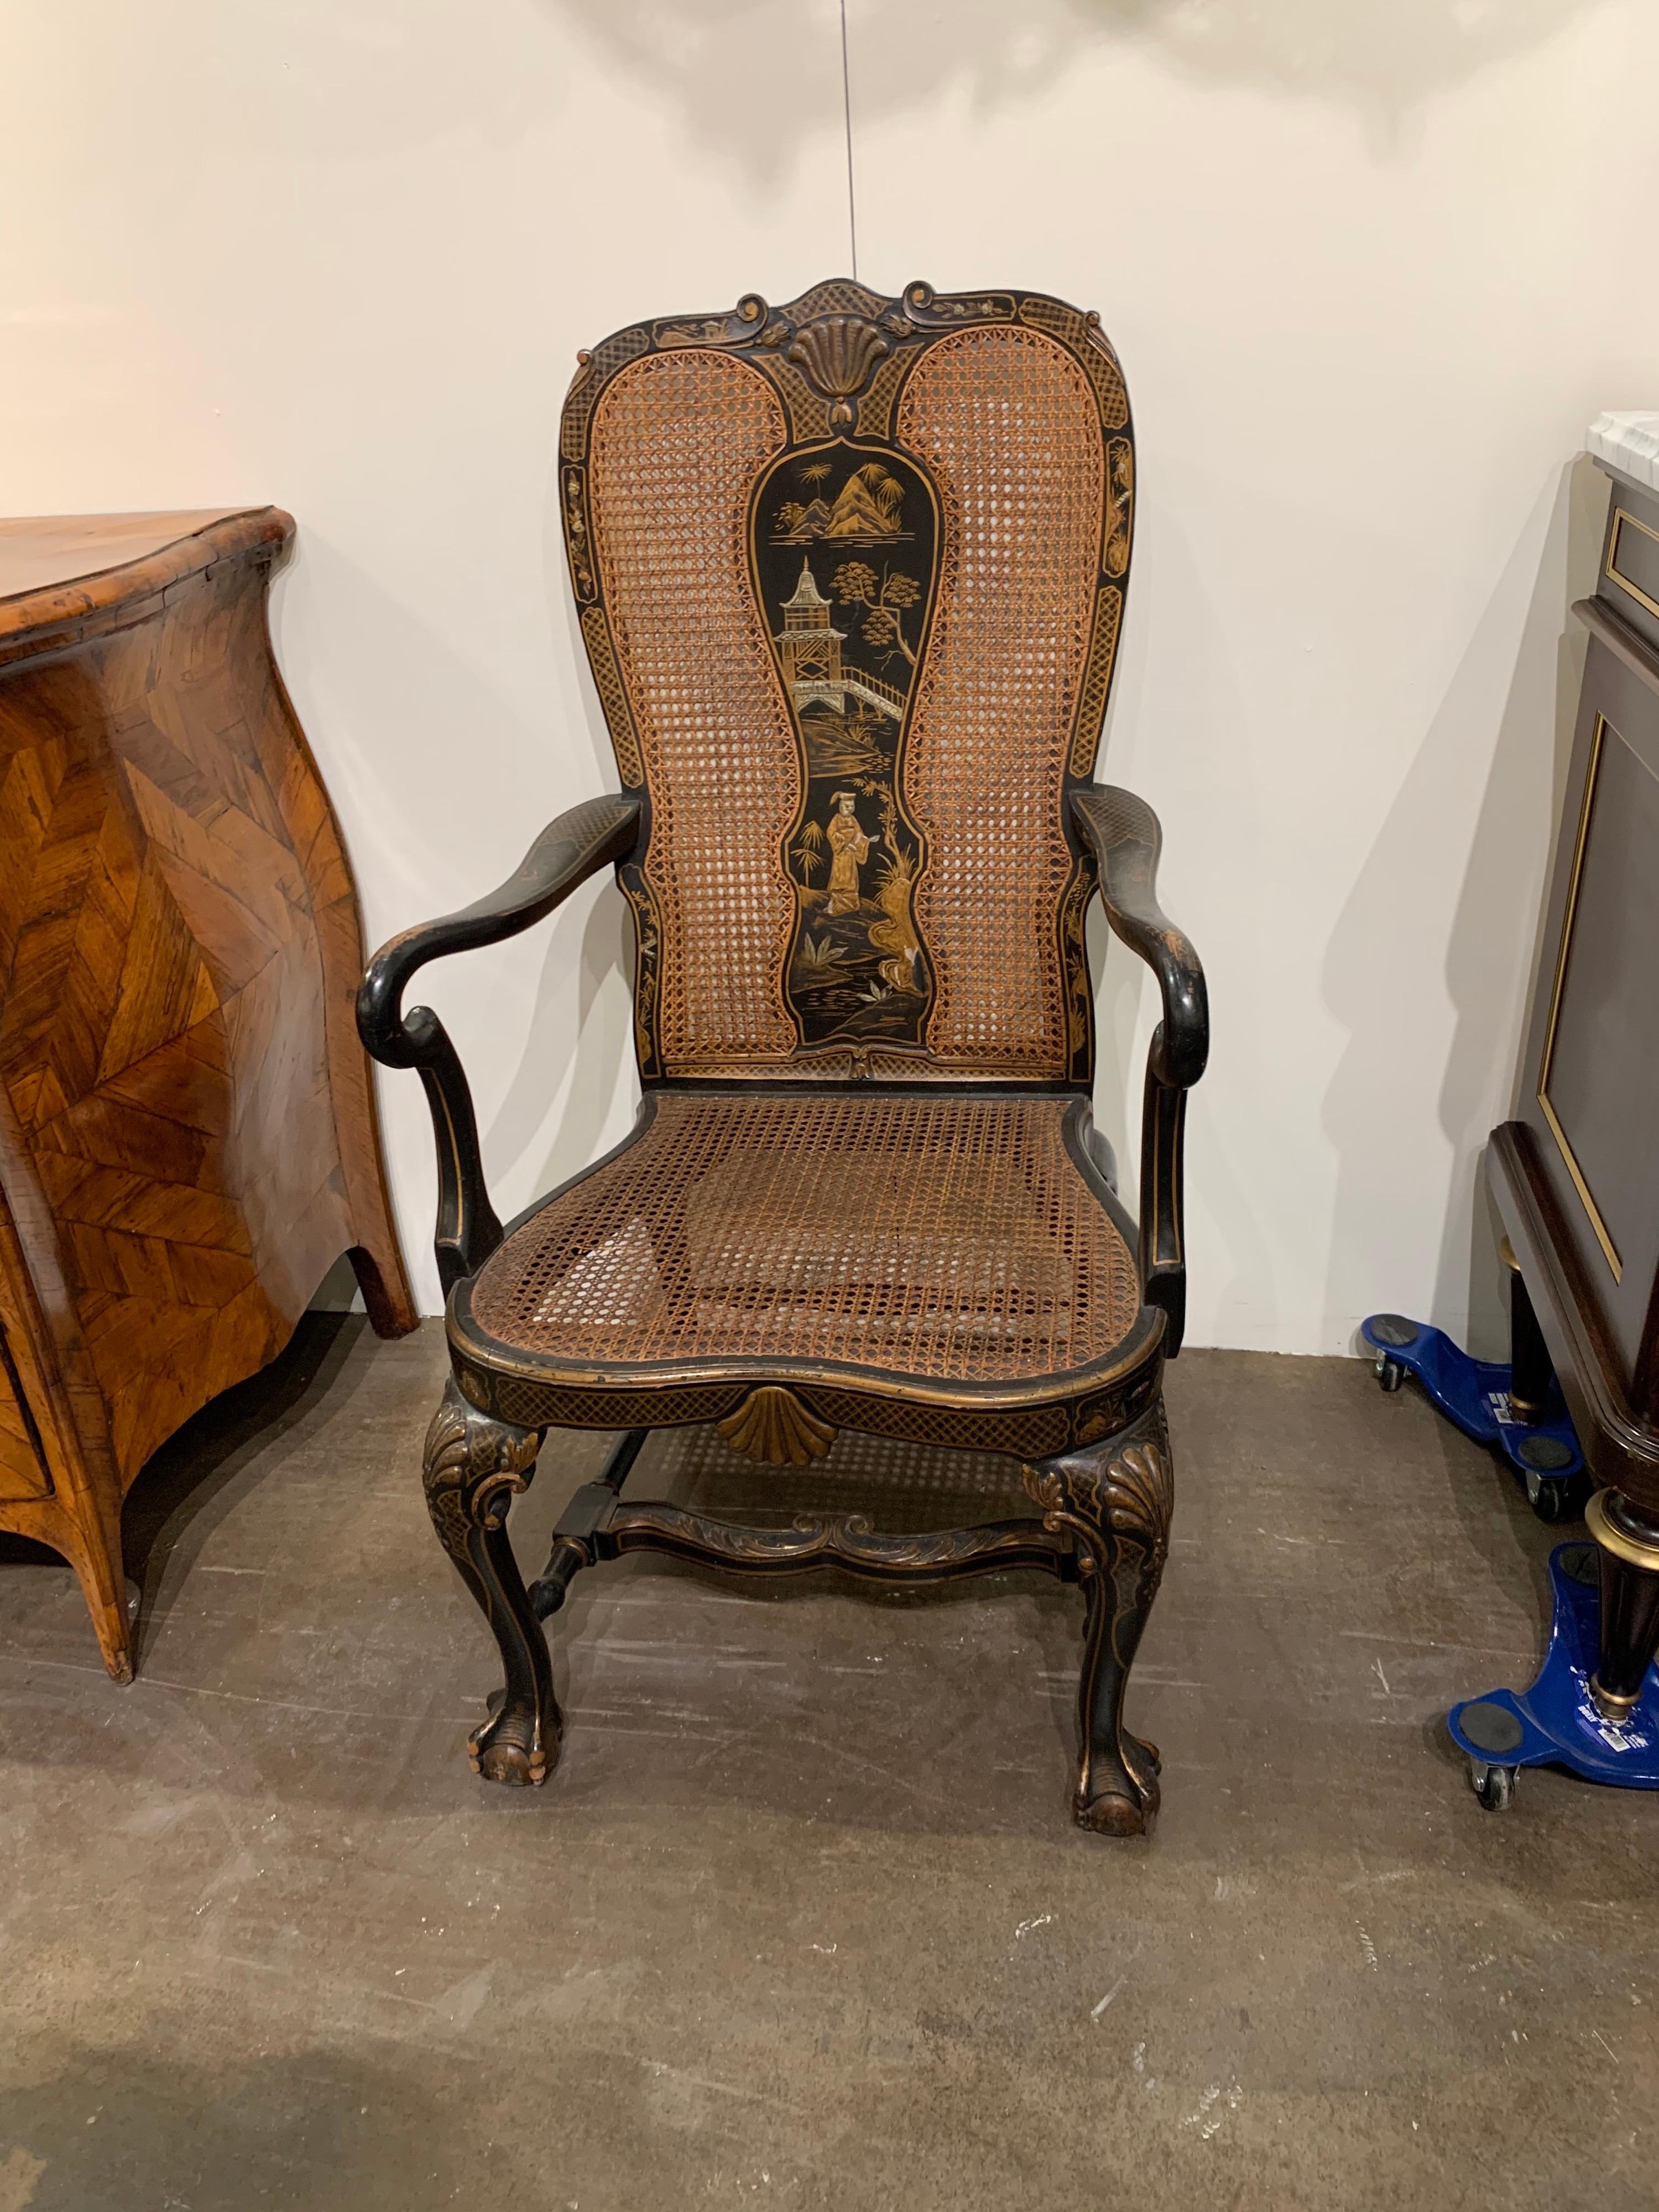 Fabulous 19th century English Queen Anne chinoiserie high back armchair. Nice hand painted design on the back, arms and legs. There is a small hold in the cane, but the overall stability of the chair is fine. A great decorative piece!